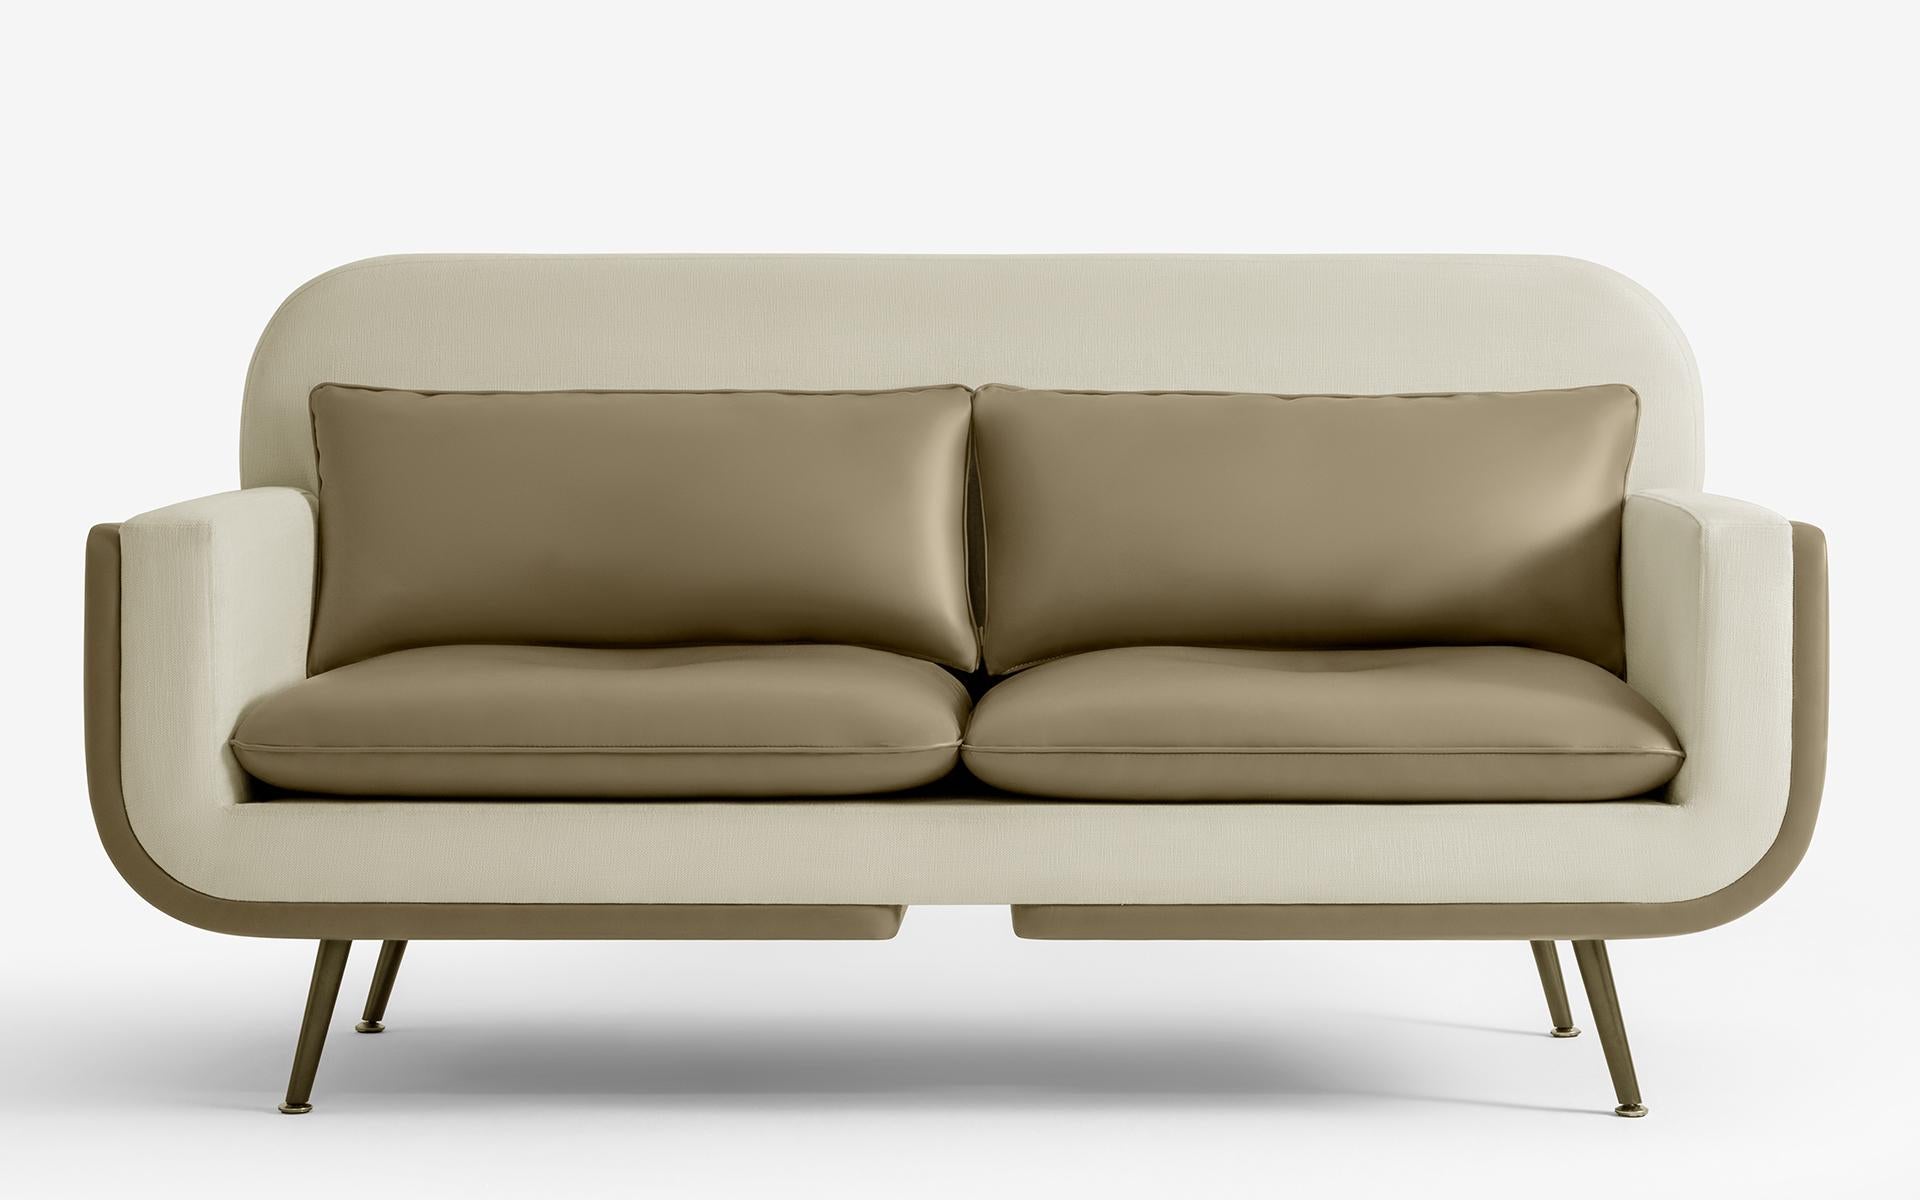 Up sofa by Lagu
Designed by Ufuk Ceylan
Dimensions: W 160 x D 80 x H 80 cm.
Materials: Faux Leather, Foam, Hardwood, Metal, Upholstery.

Designed to maximize both form and comfort, the Up two seater sofa will add a unique style to your space.
You